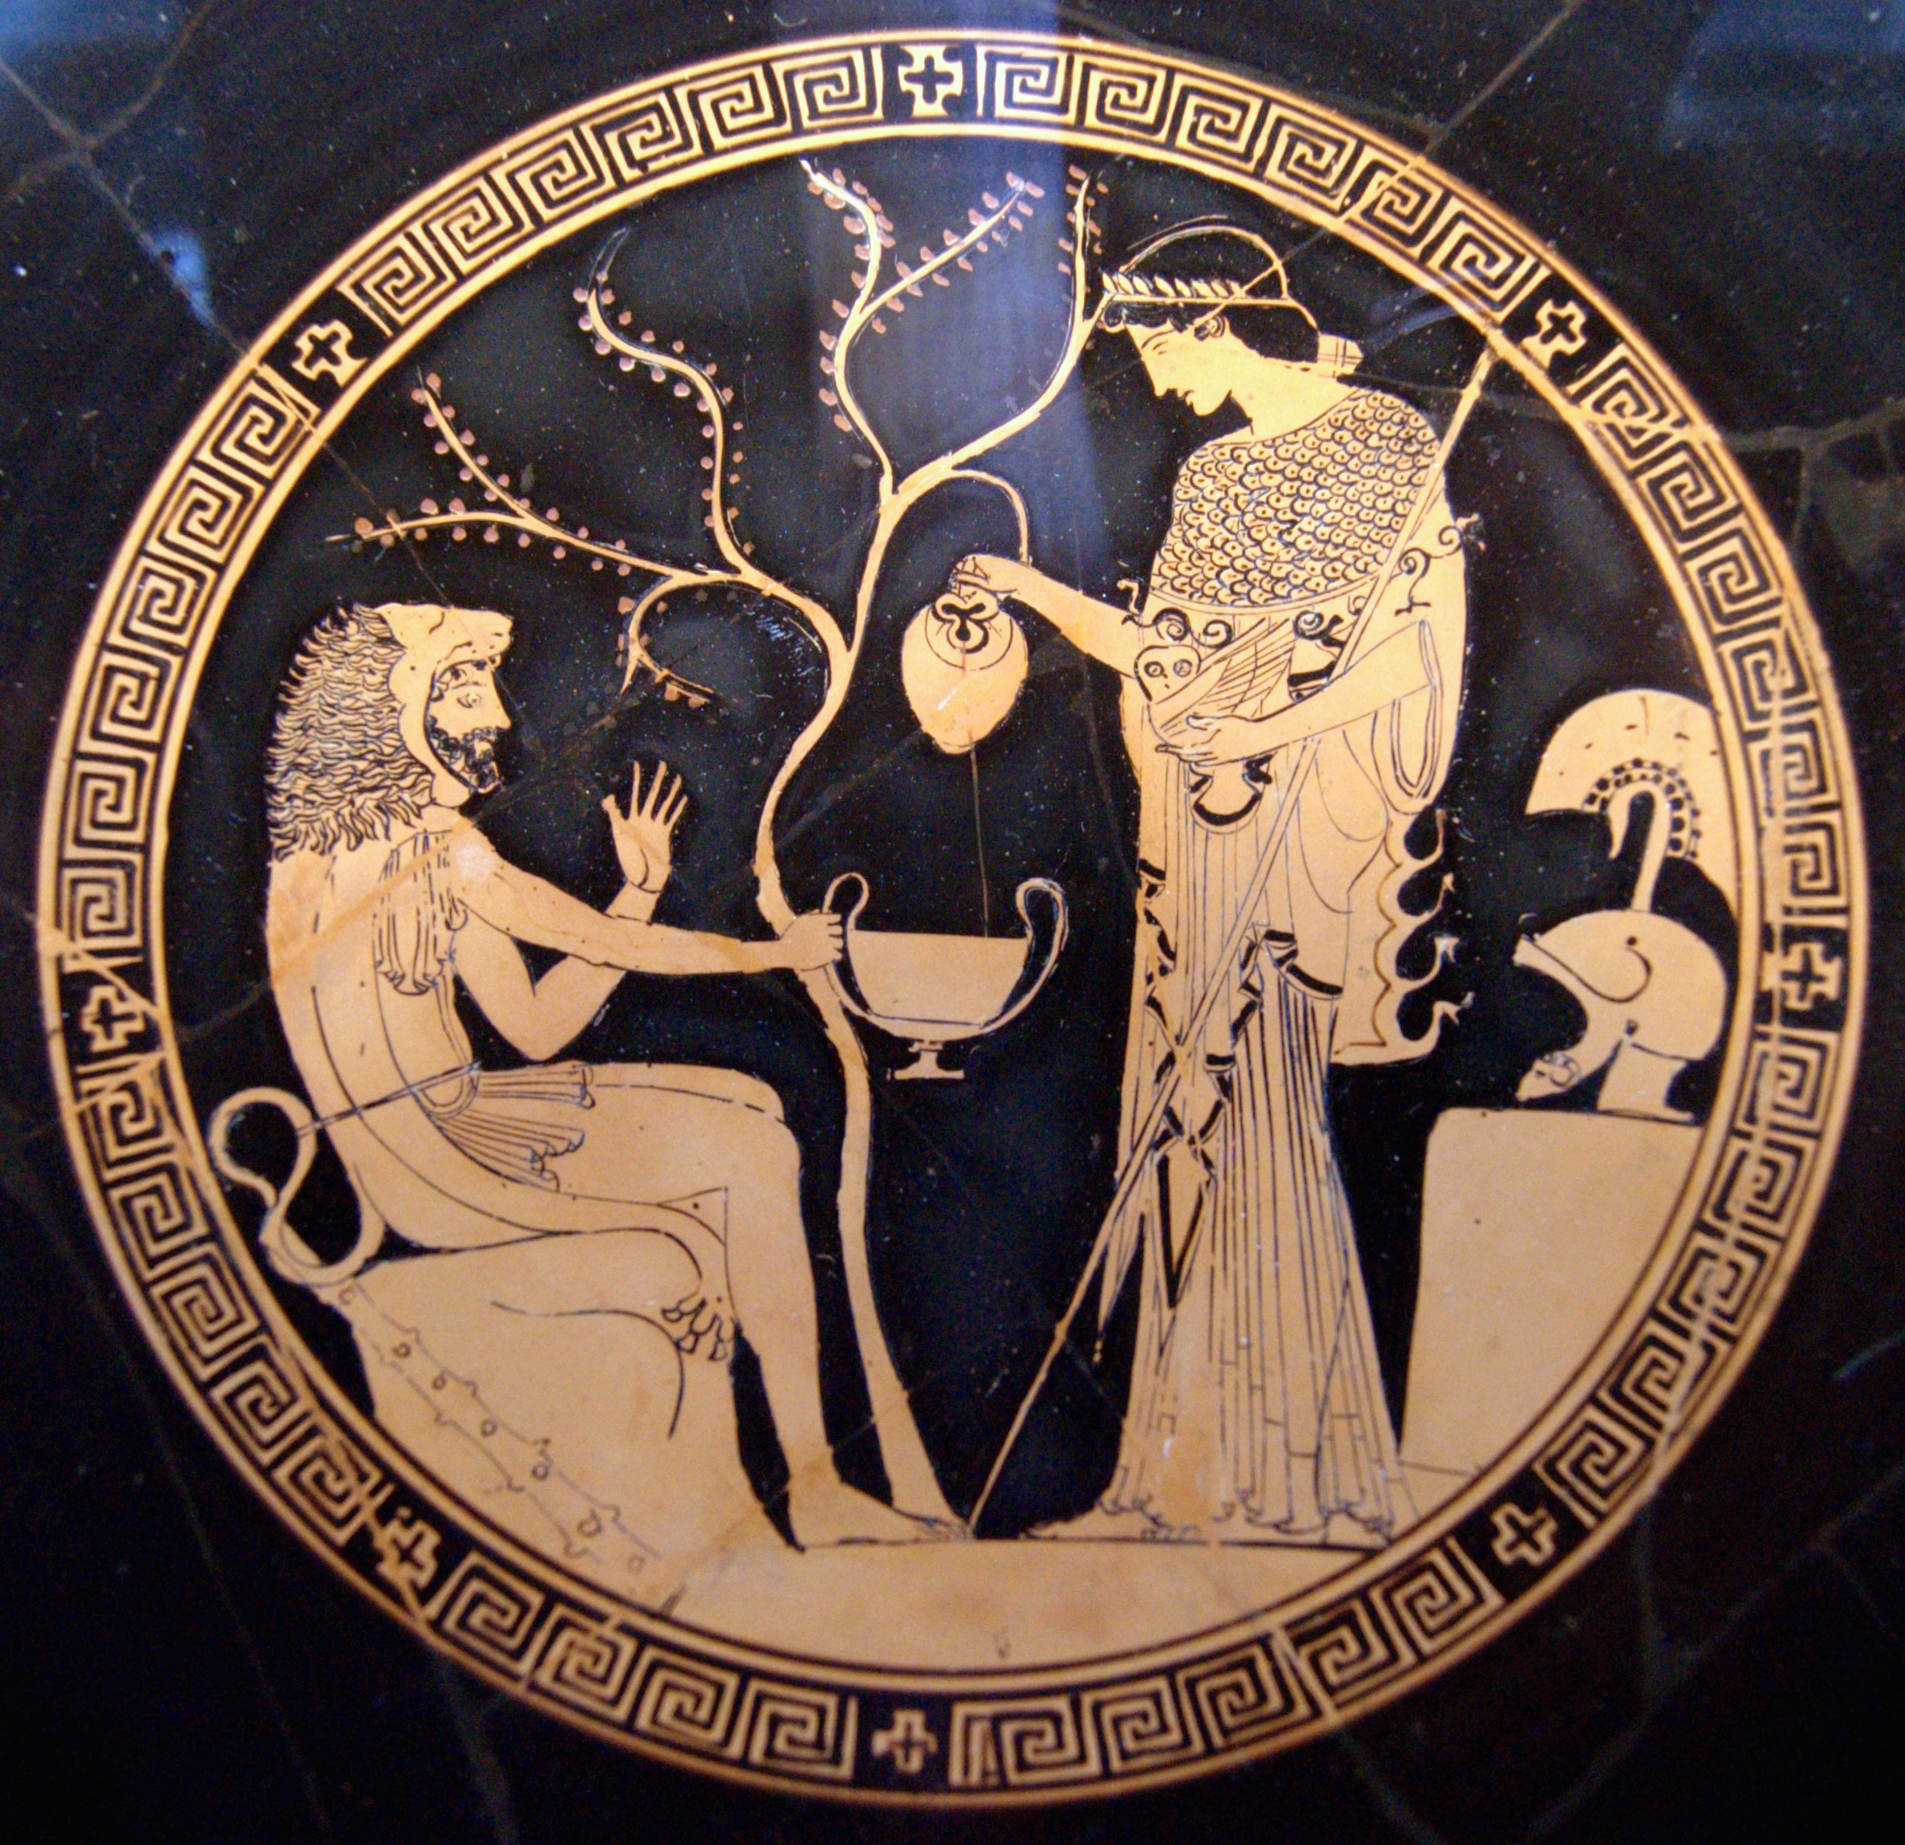 Heracles sits wearing his lion skin and holding a cup. Athena stands before him pouring a liquid into his cup. Athena is wearing the aegis and holding a spear, and her helm rests beside her.